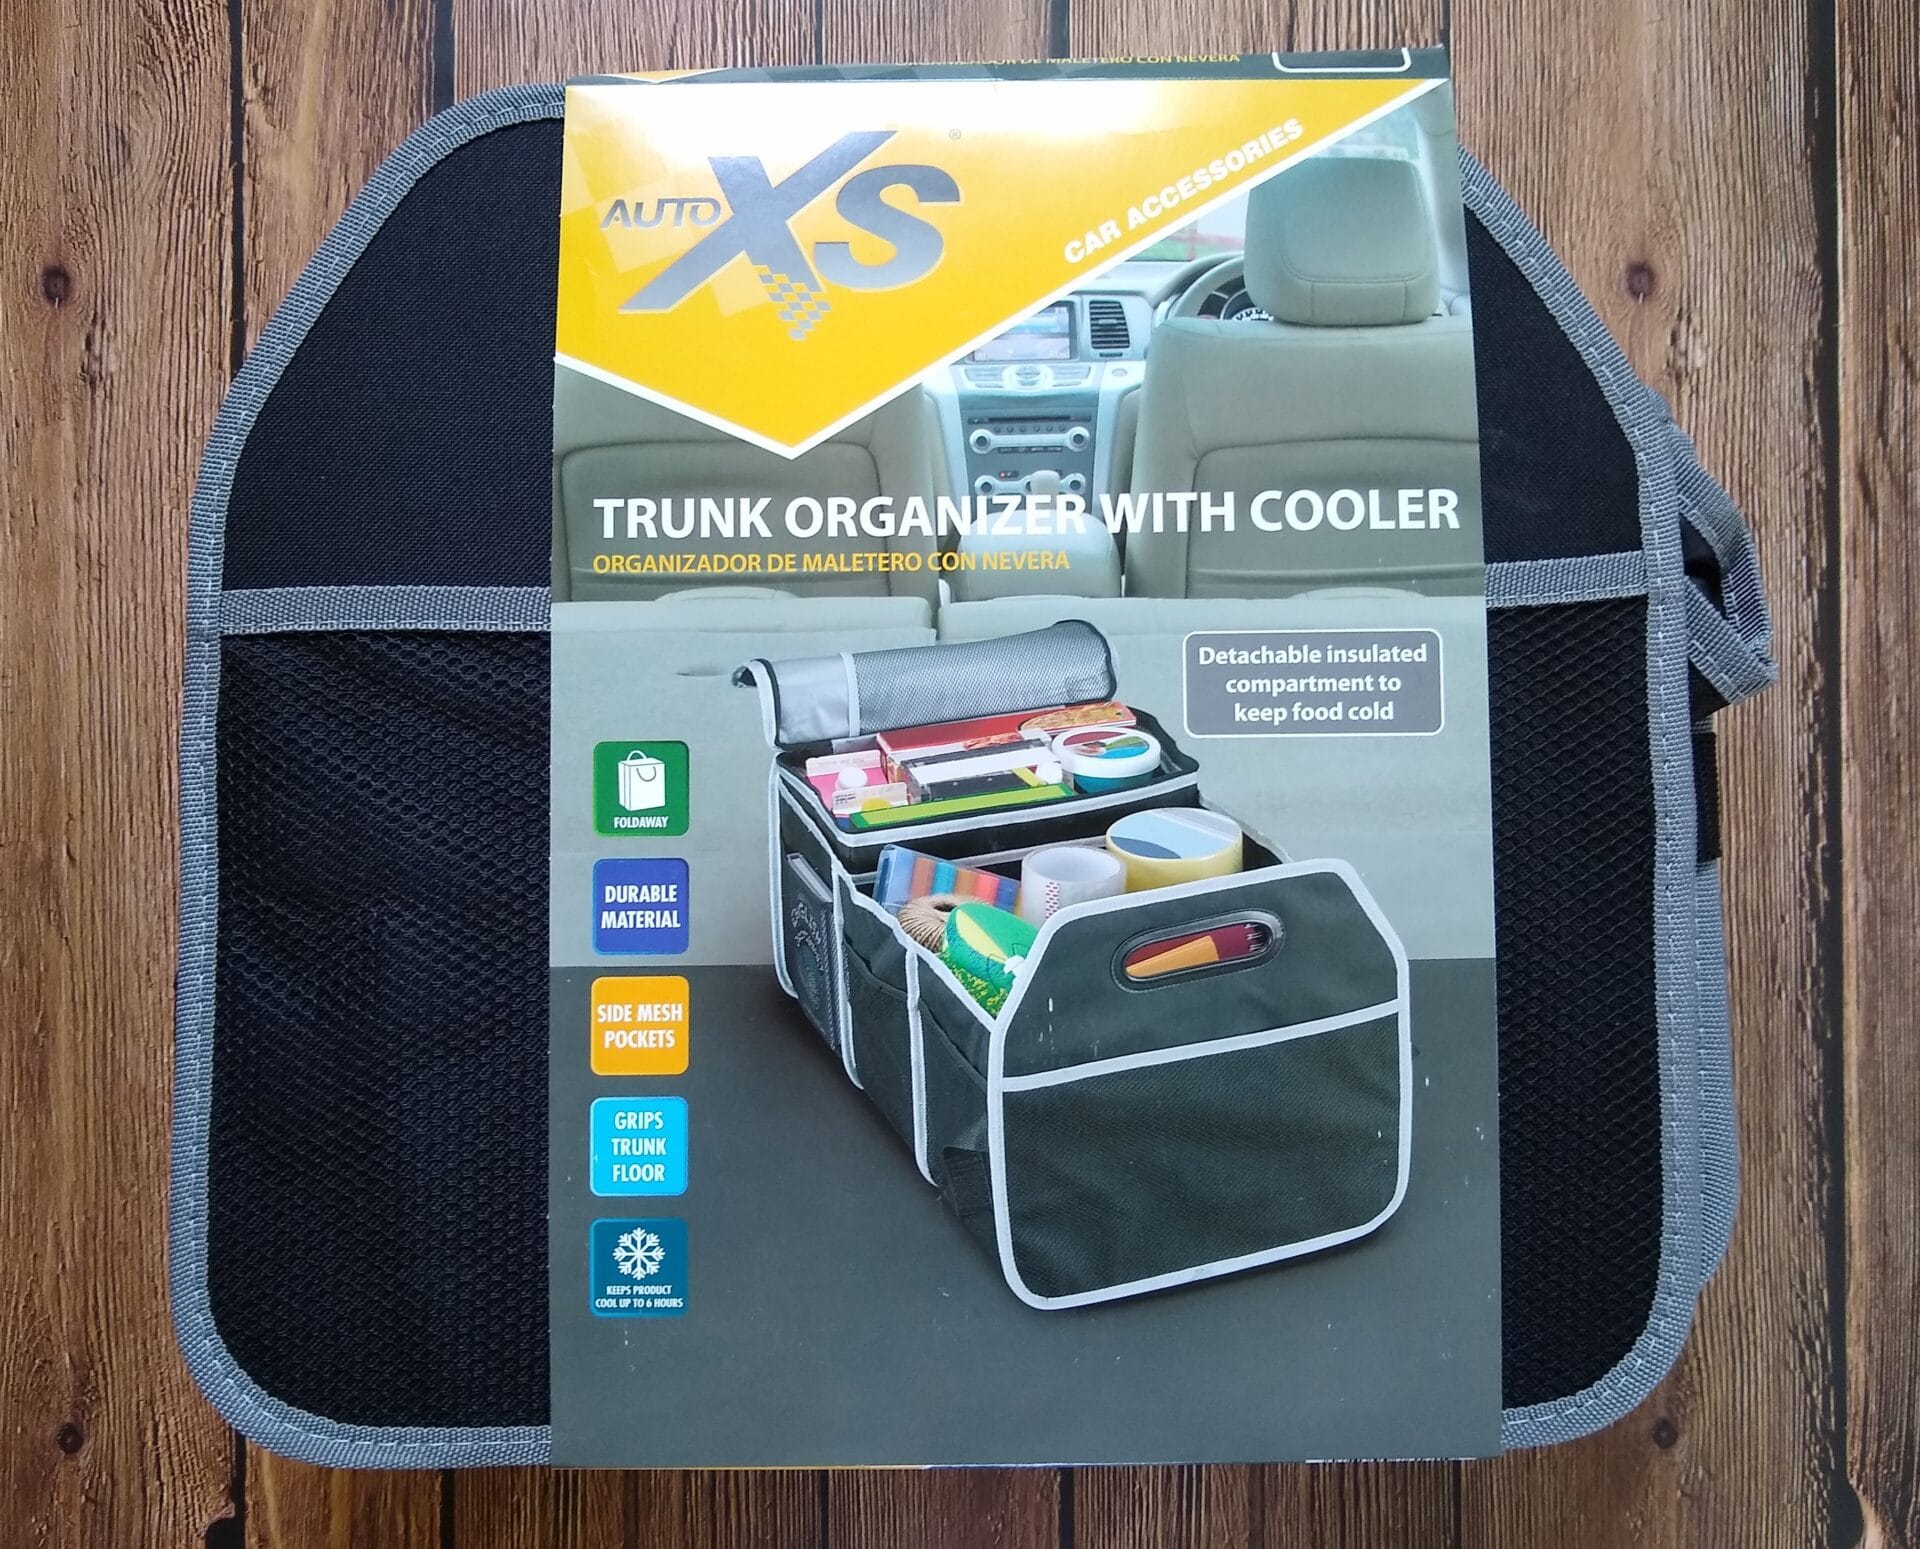 Collapsible Trunk Organizer Fully Featured and Washable